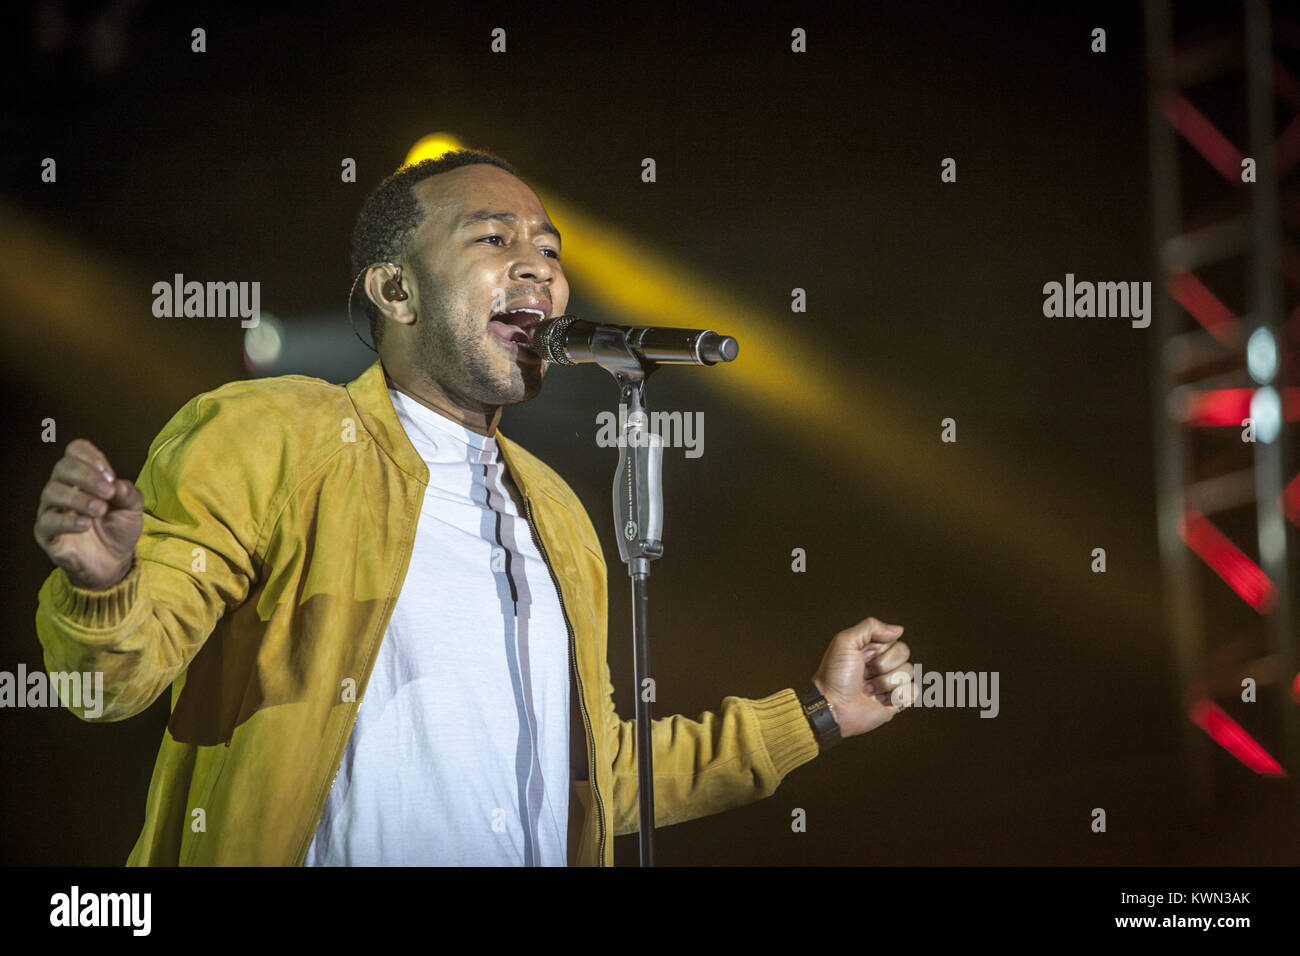 The American singer and actor John Legend pictured live on stage at Splash Festival in Germany, 2013. Stock Photo